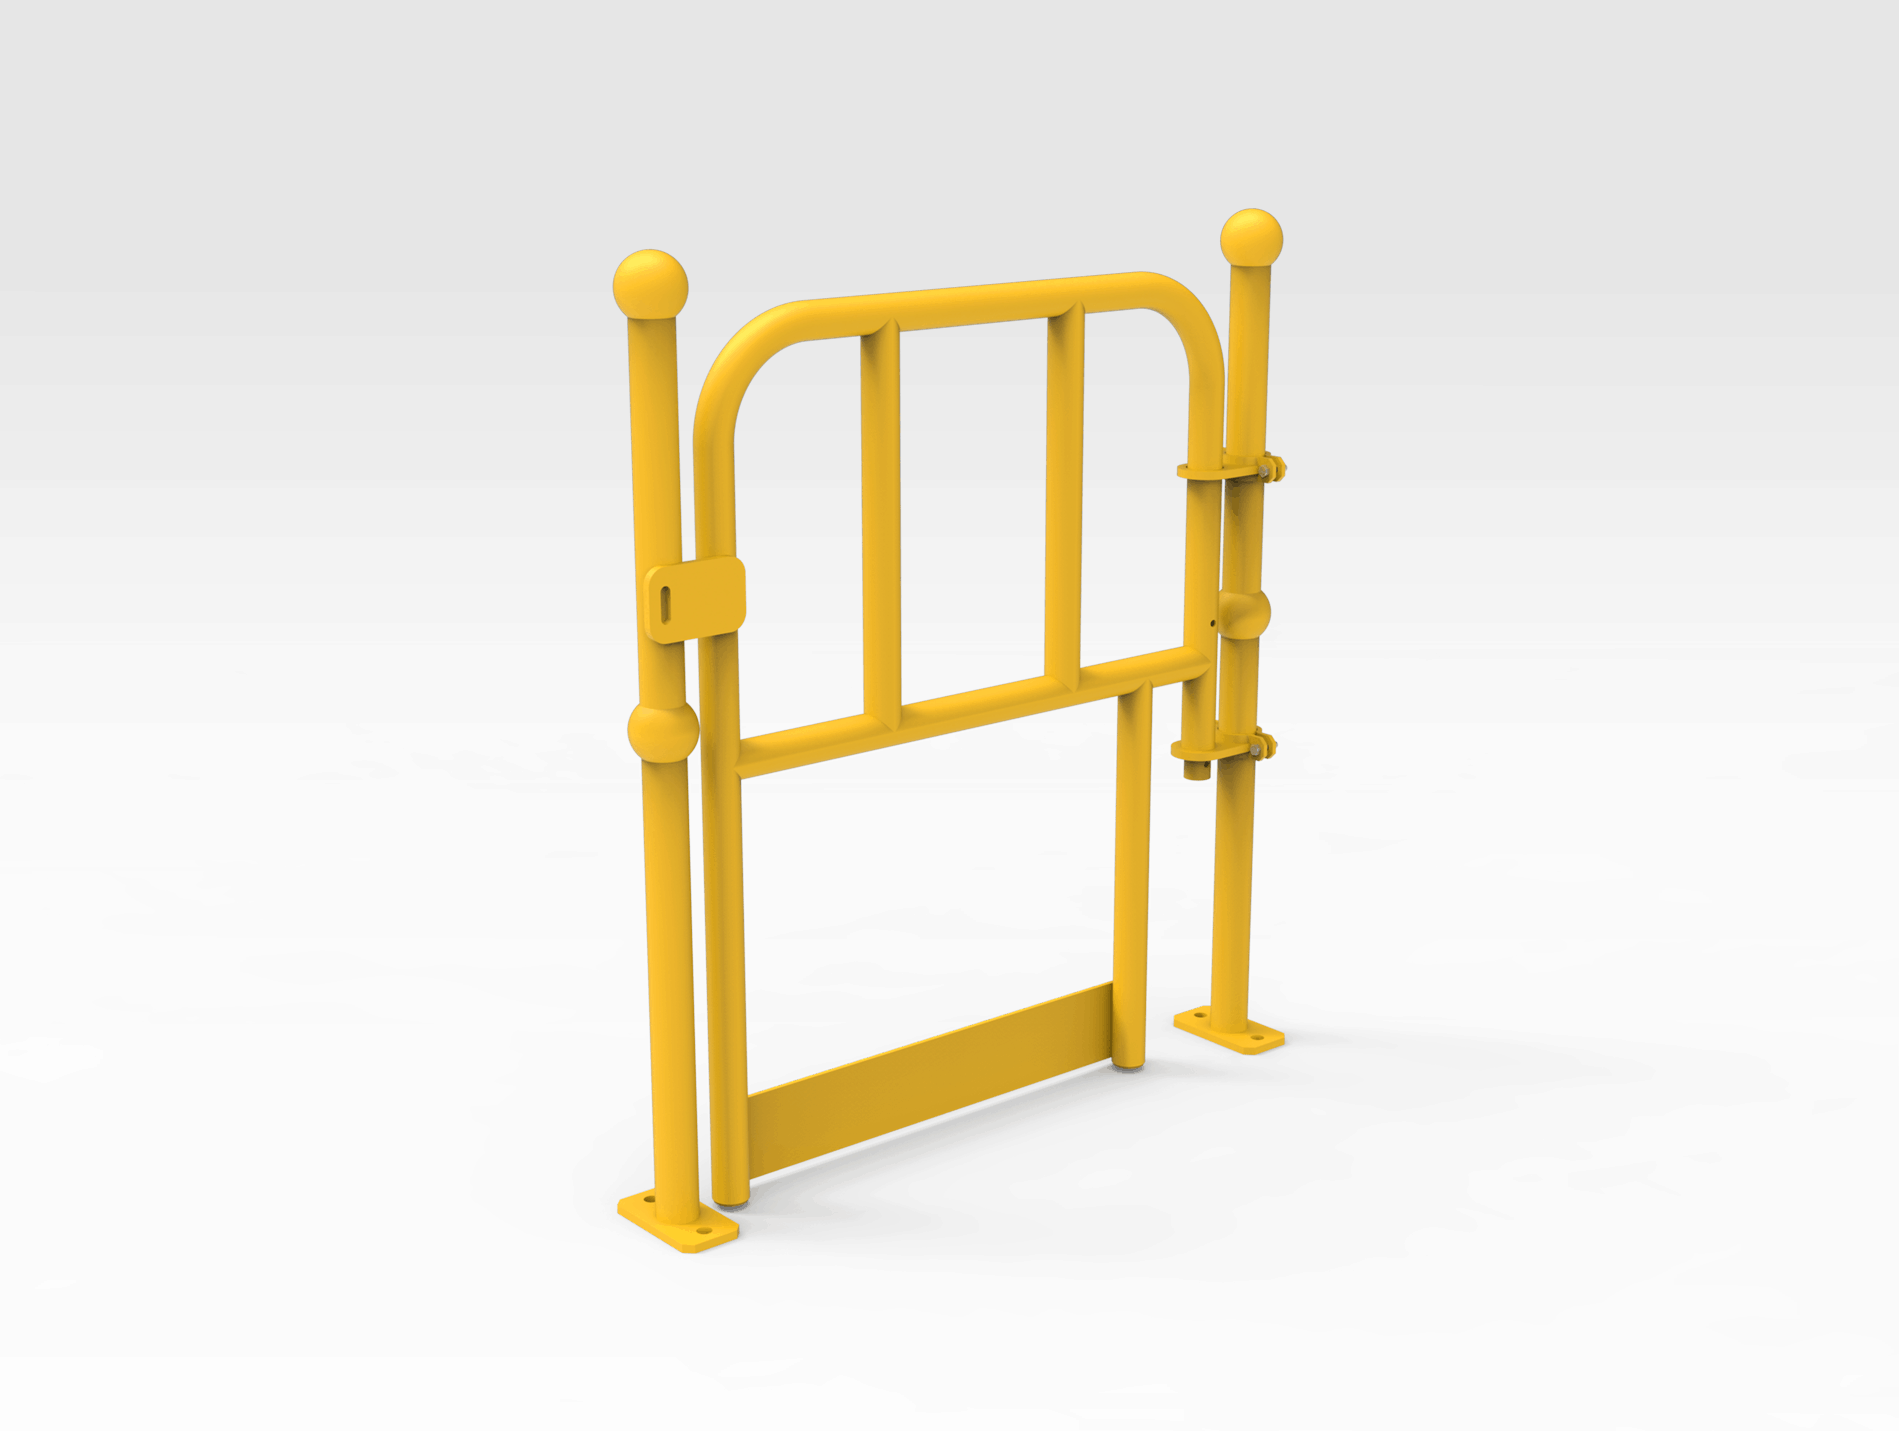 Spring Loaded Gate 960mm (h) x 720mm (w)